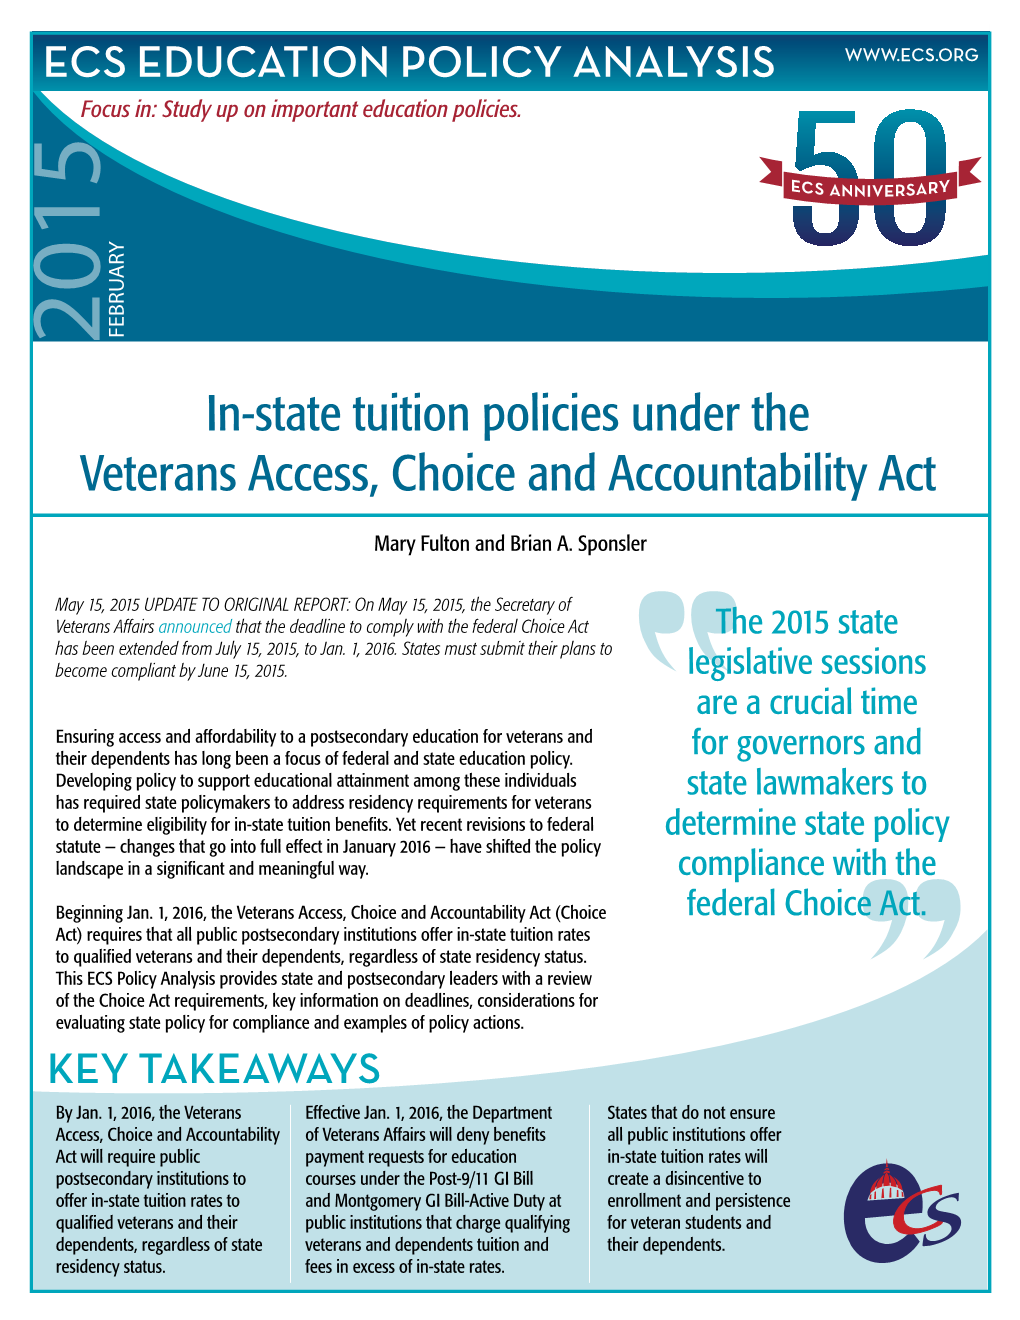 In-State Tuition Policies Under the Veterans Access, Choice And